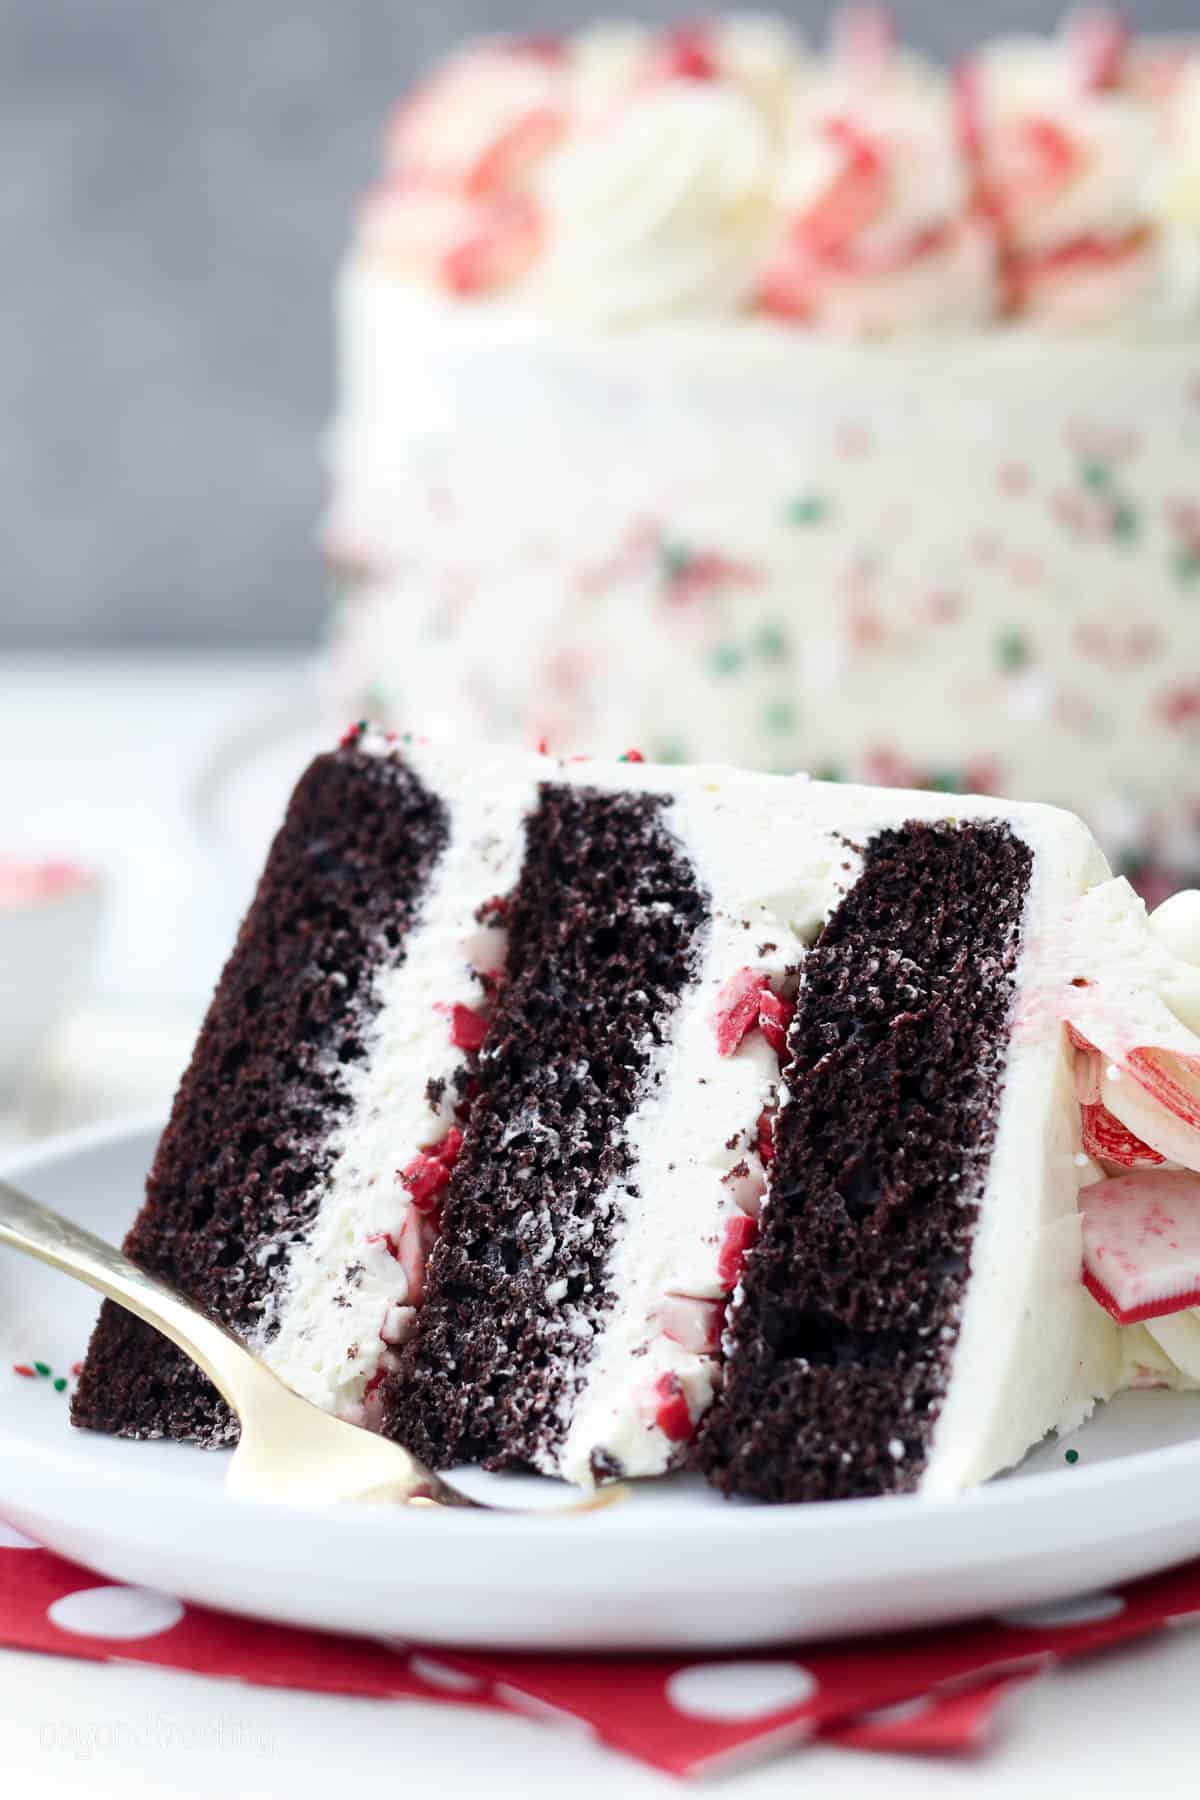 side view of a slice of chocolate peppermint cake on it's side on a white plate